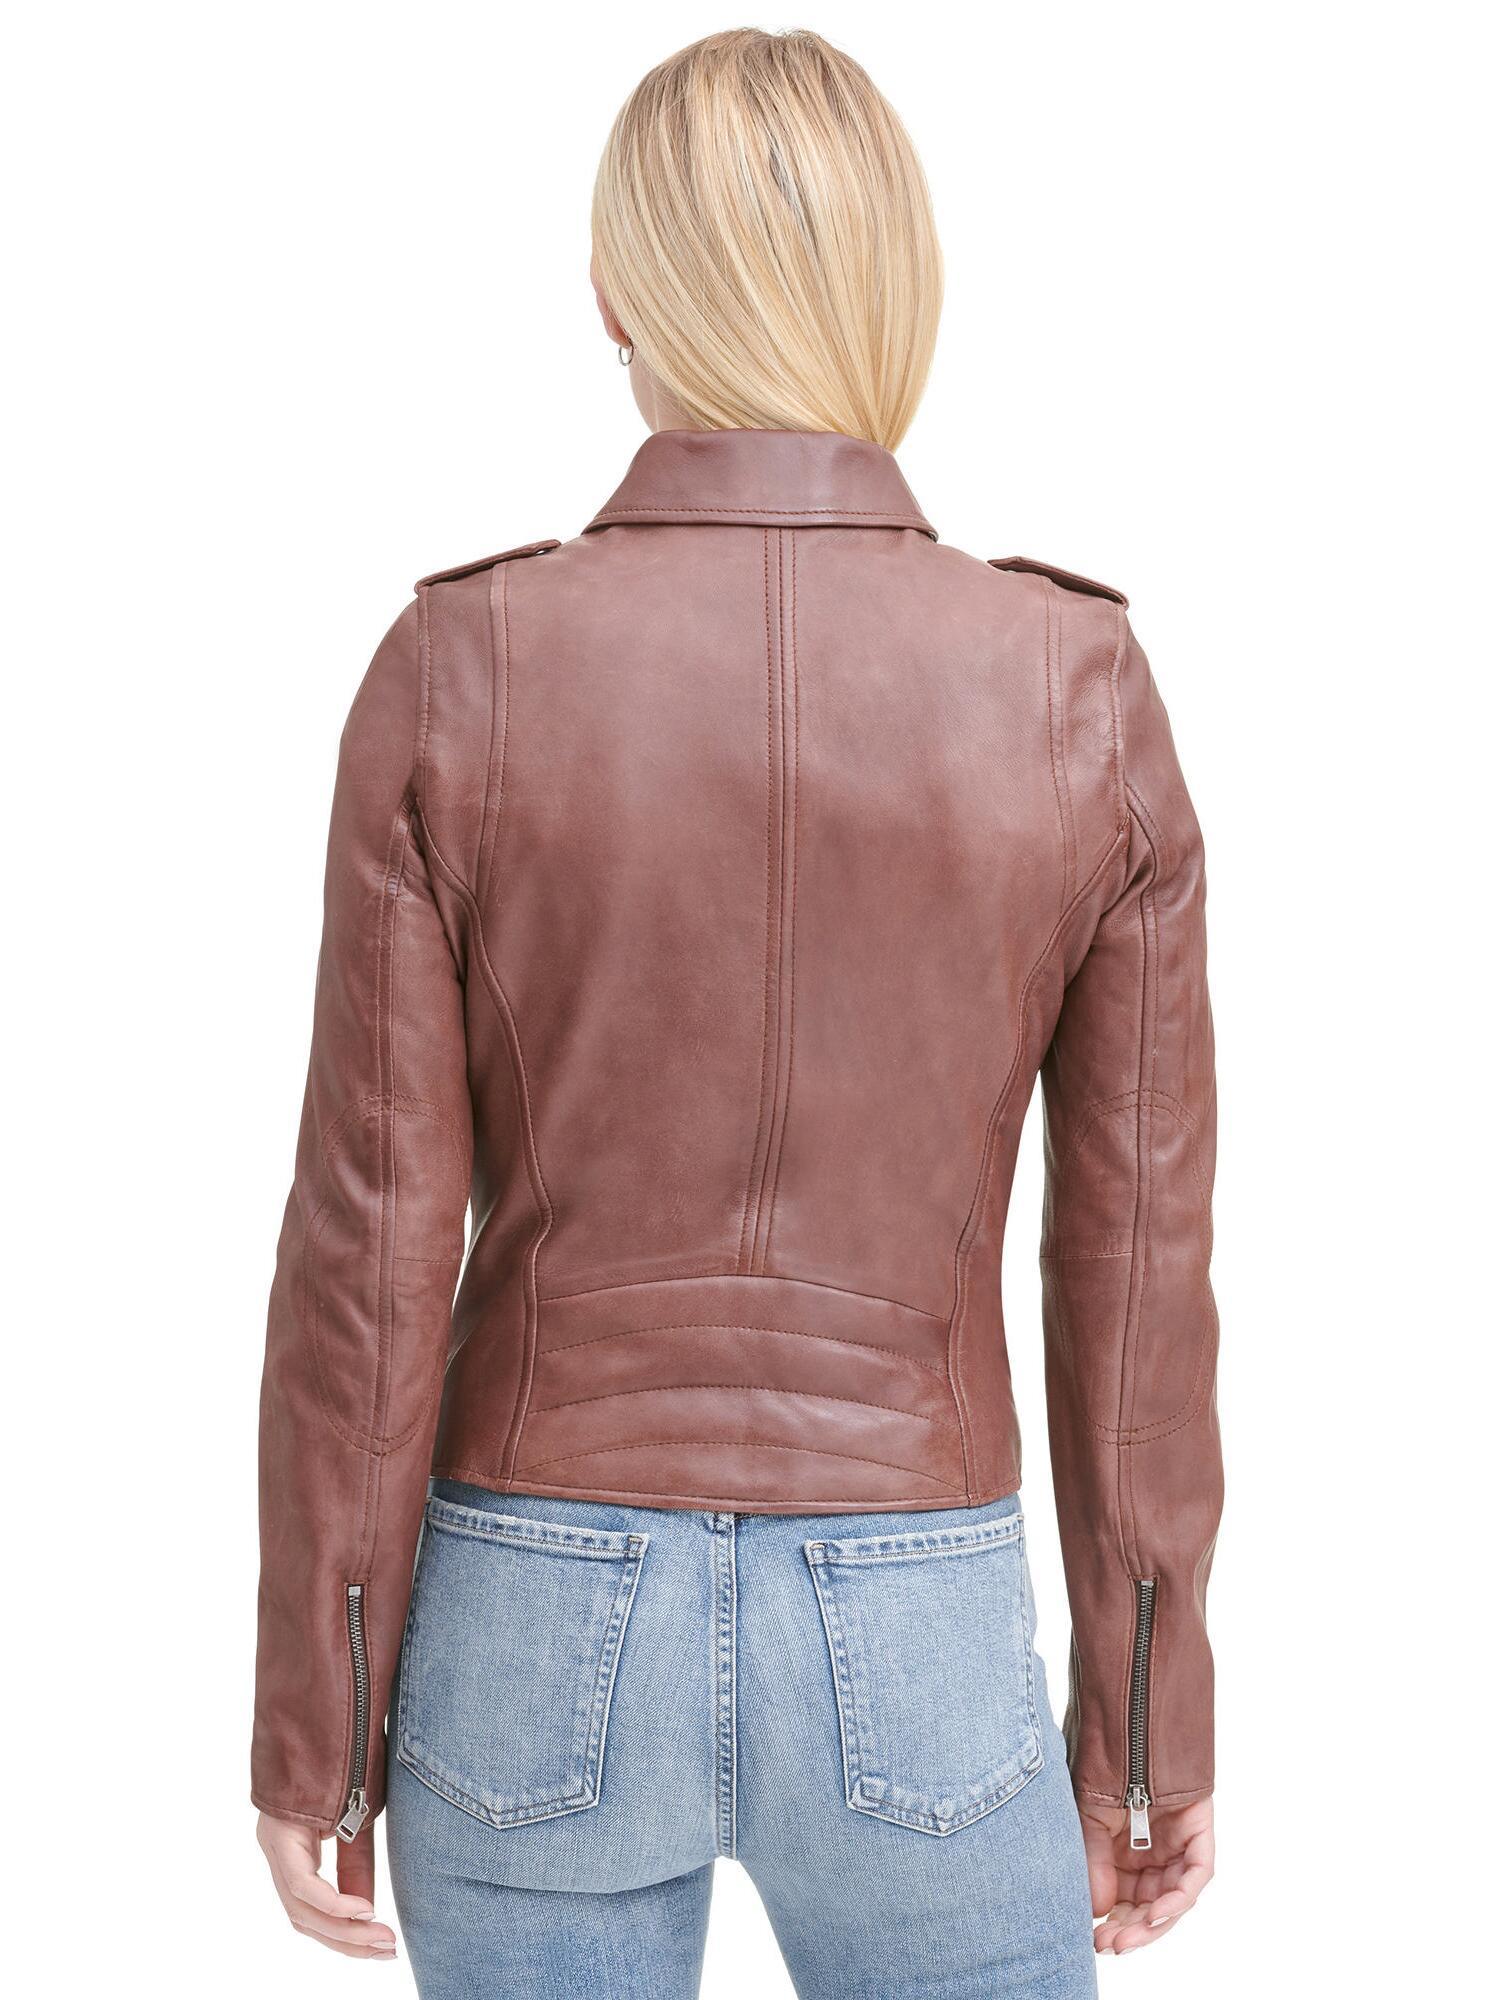 Wilsons Leather Meredith Asymmetrical Leather Jacket in Cognac (Brown